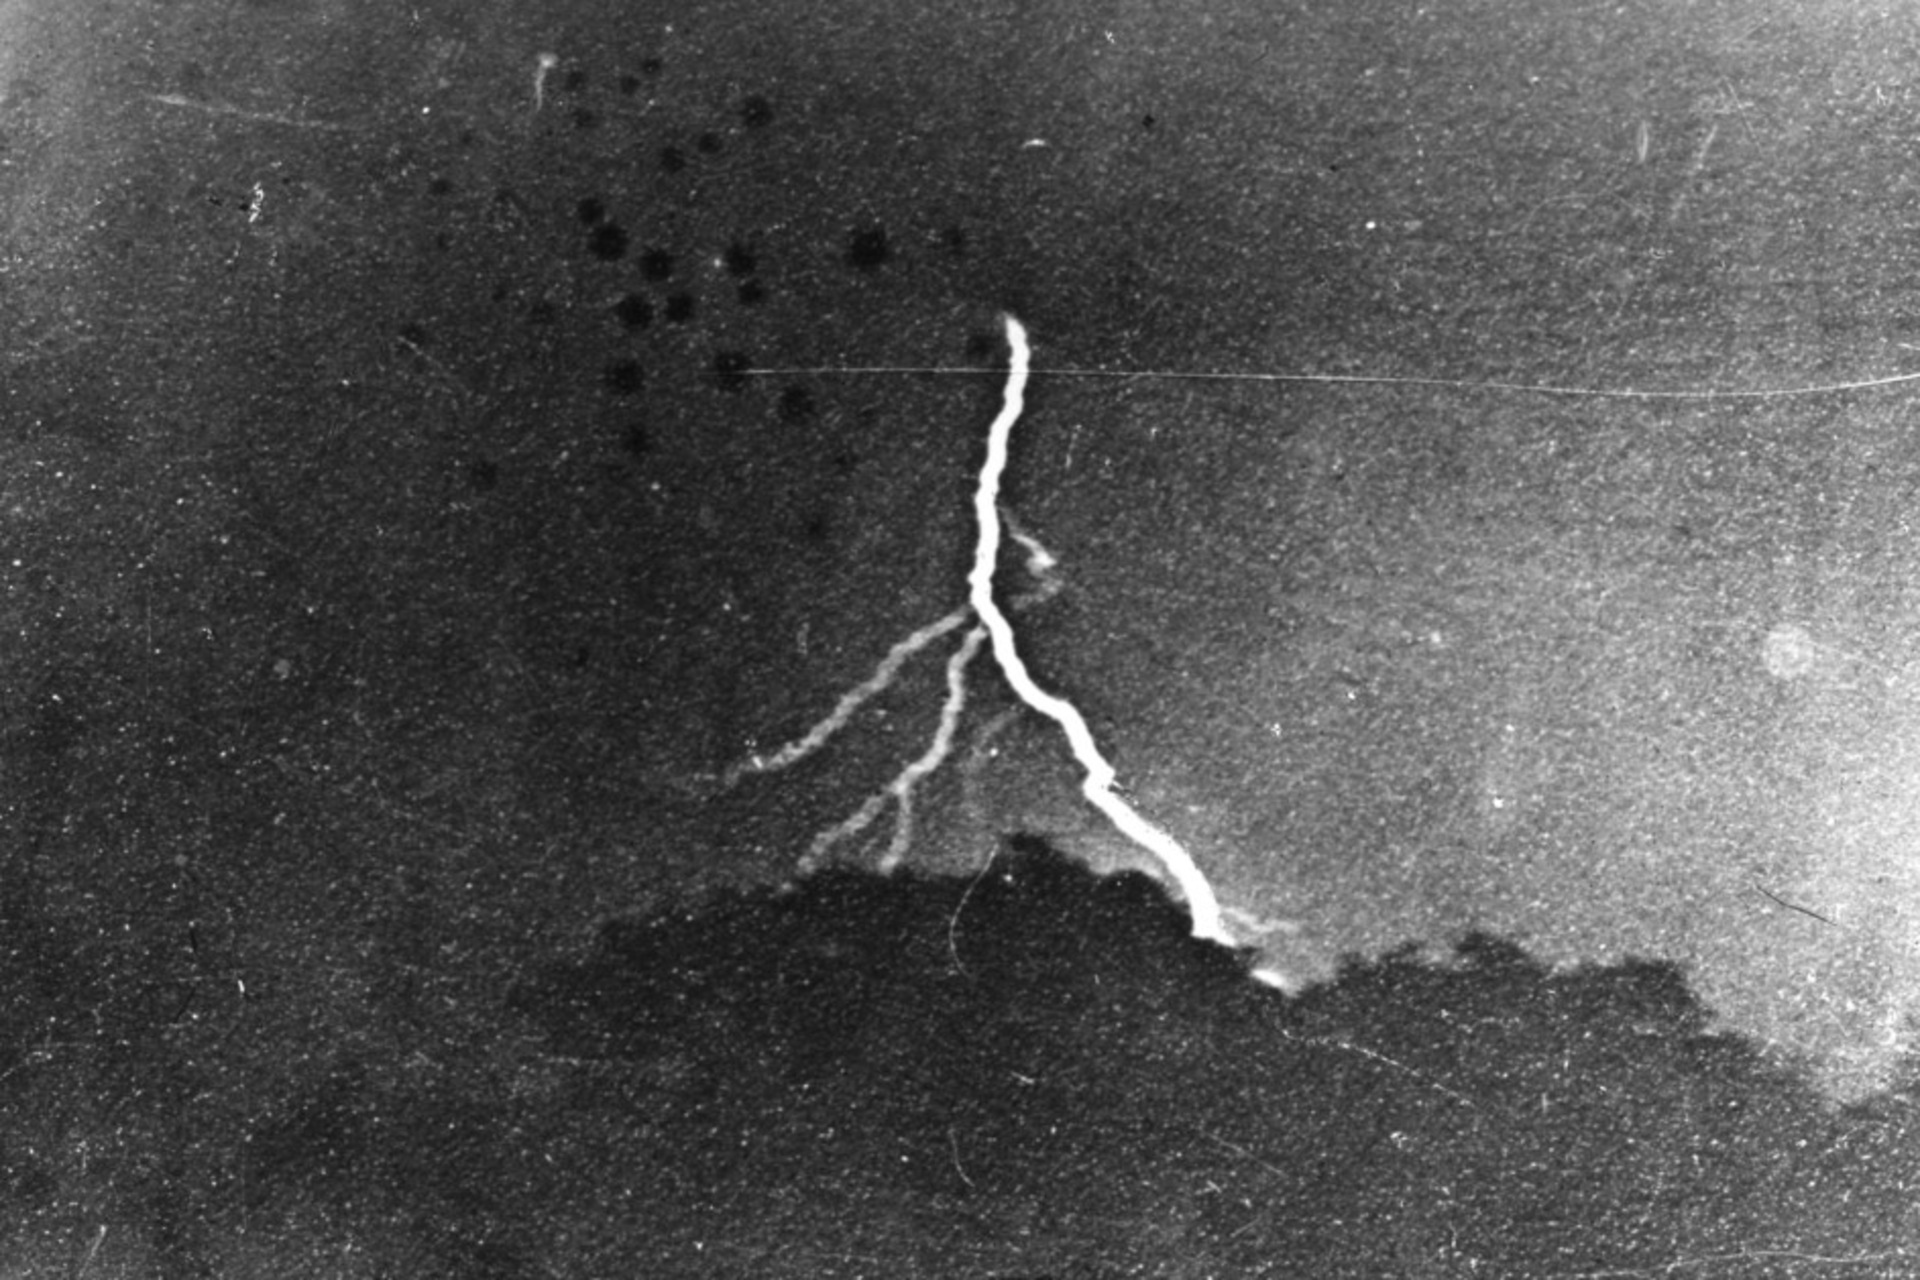 Lightning: The first photograph of lightning, taken by William Nicholson Jennings on September 2, 1882 in Philadelphia, and preserved as a gelatin silver print at The Franklin Institute